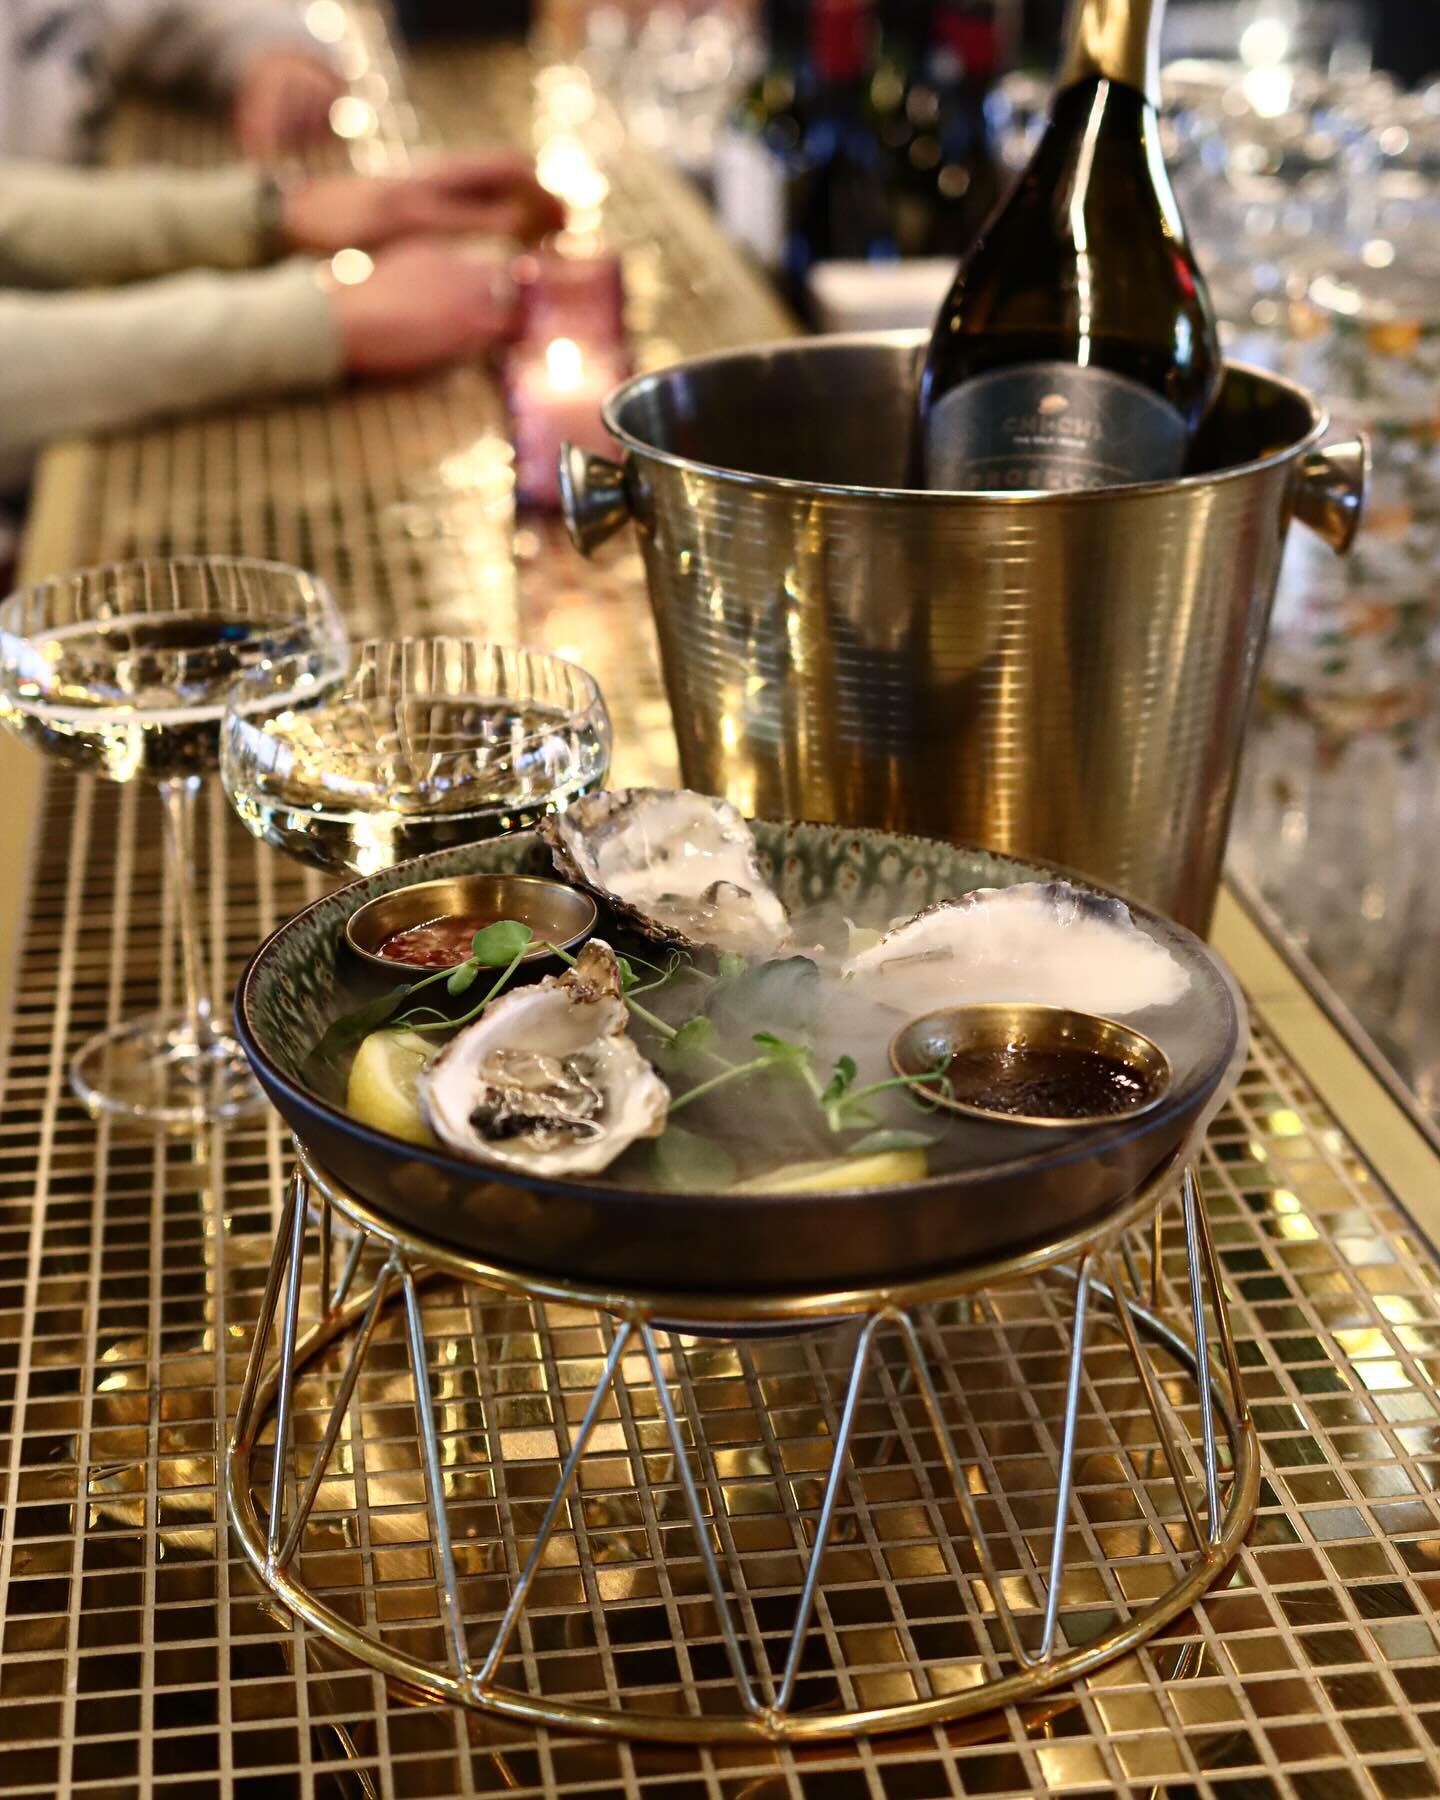 Life is too short to not have oysters and bubbles sometimes 🥂🦪

#chichigolfvenue #chichi #chichigolf #oysters #bubbles 
#borrel #champagne #golf #golfbaan #drivingrange #golfswing